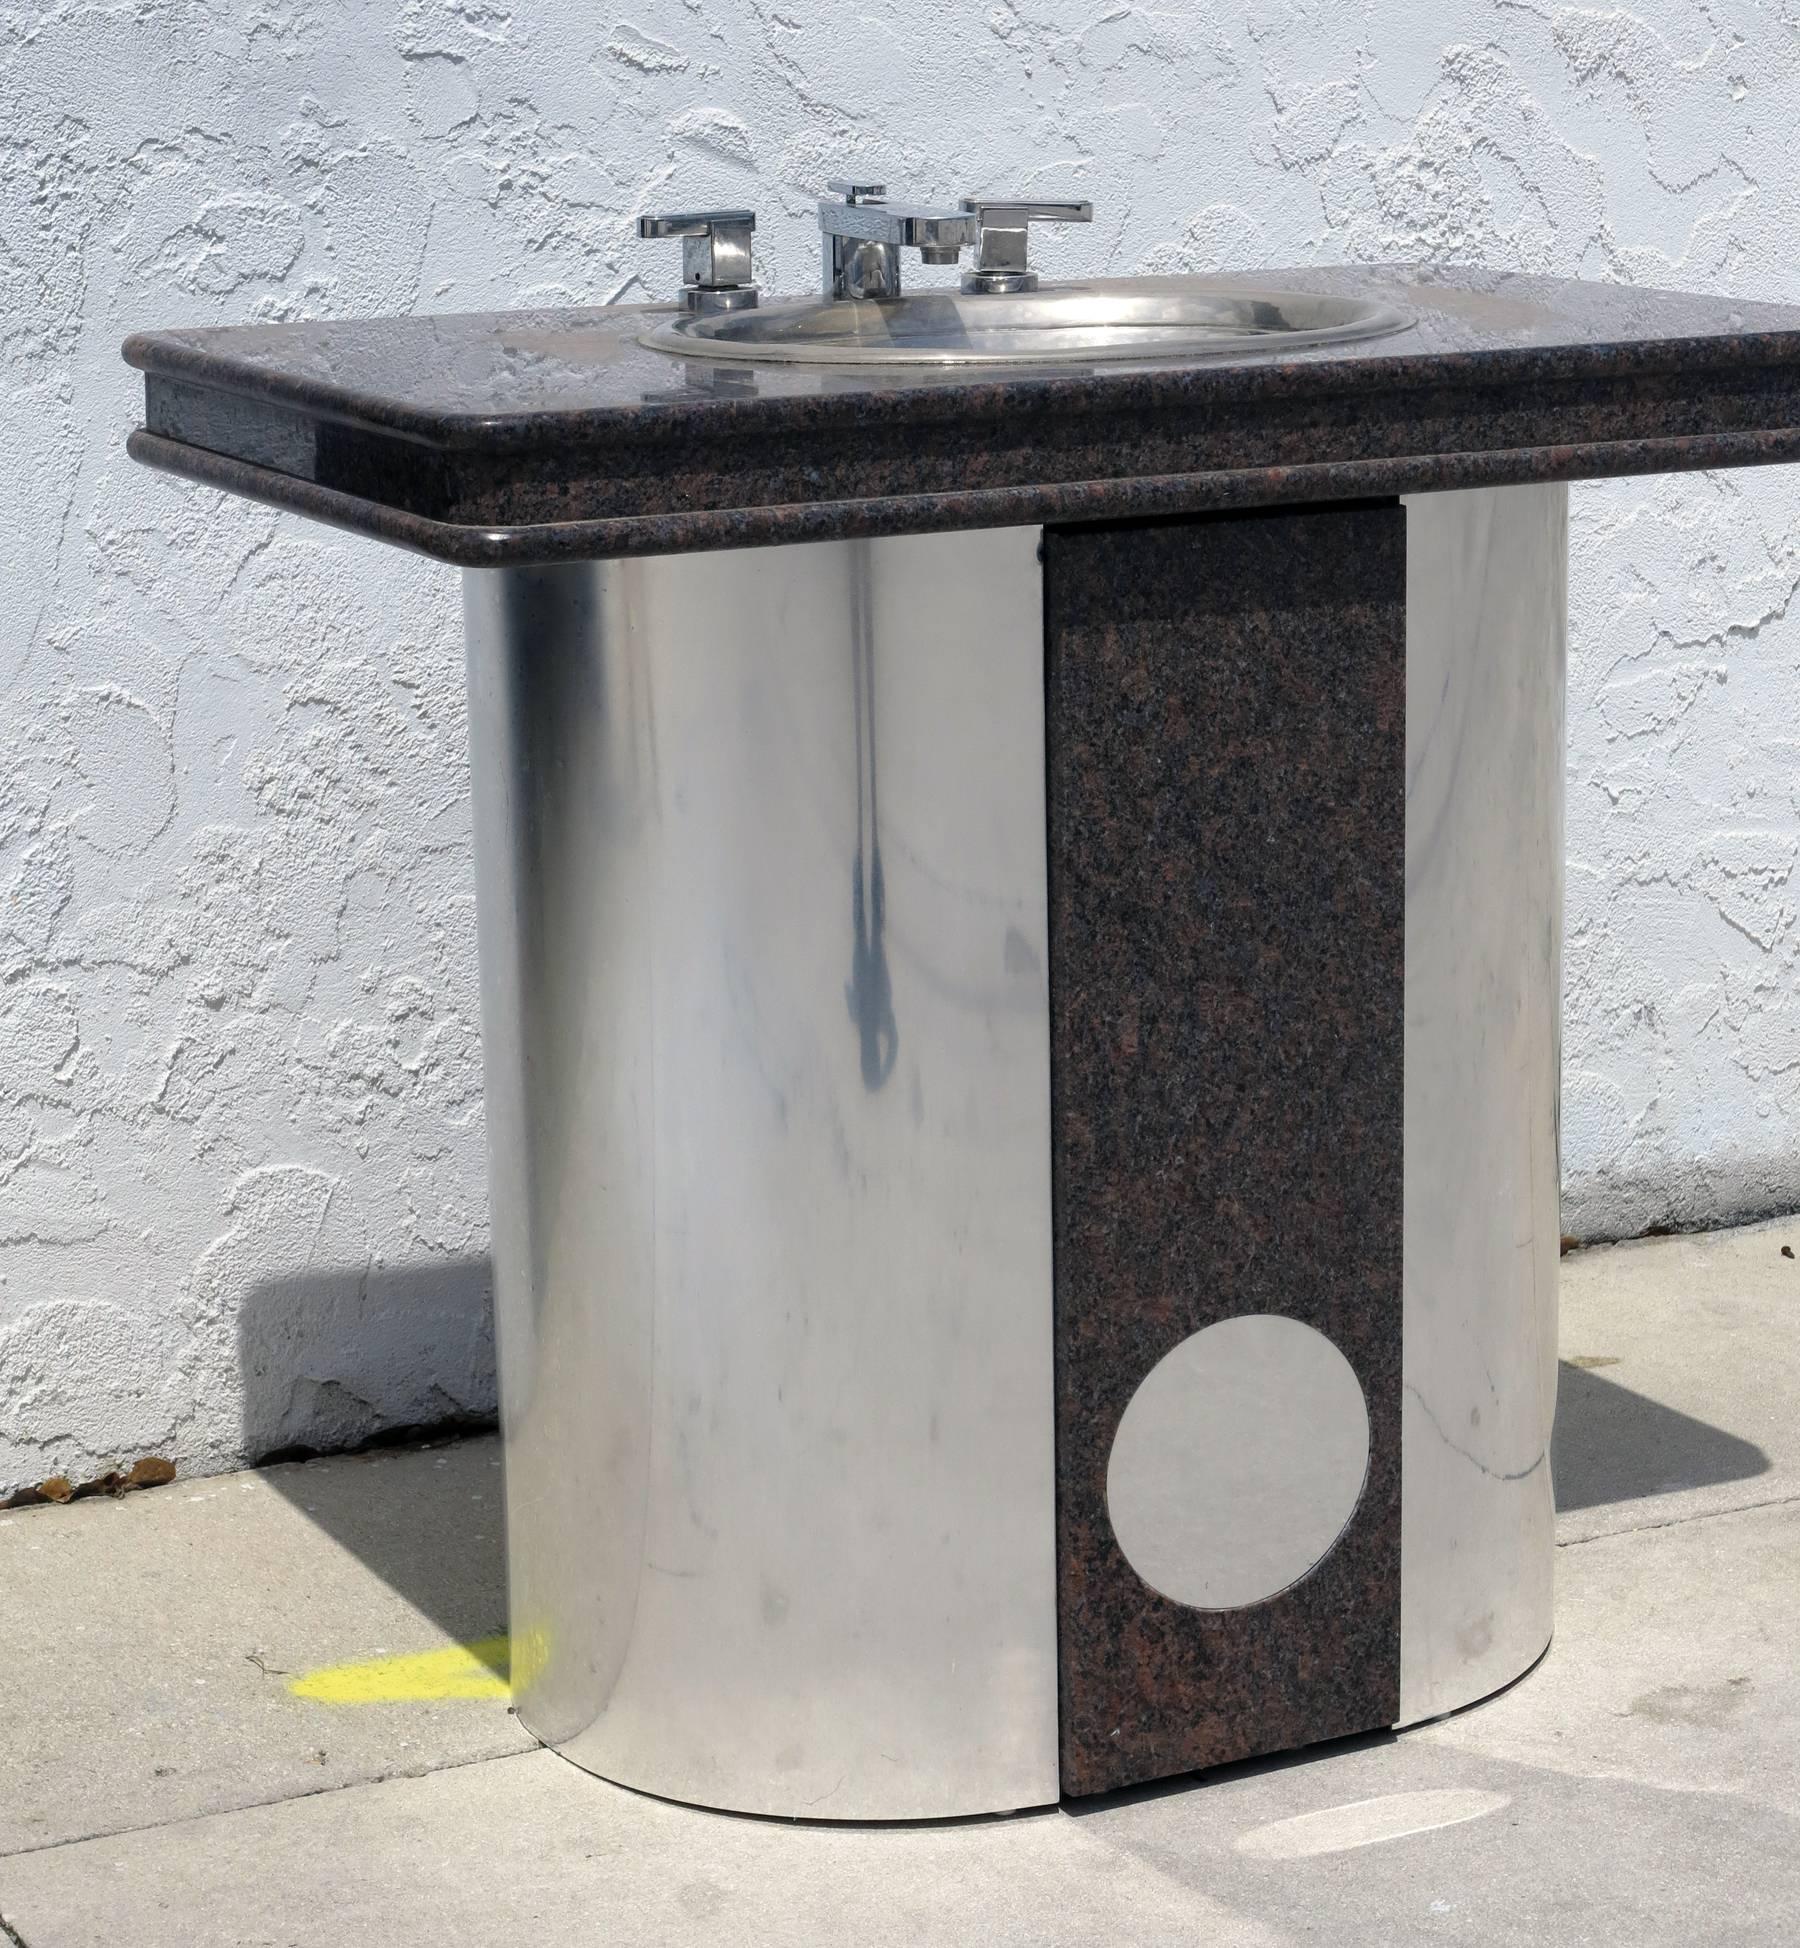 Vintage Sherle Wagner vanity sink black granite top with stainless steel base. Polished aluminum sink with chrome fixtures.